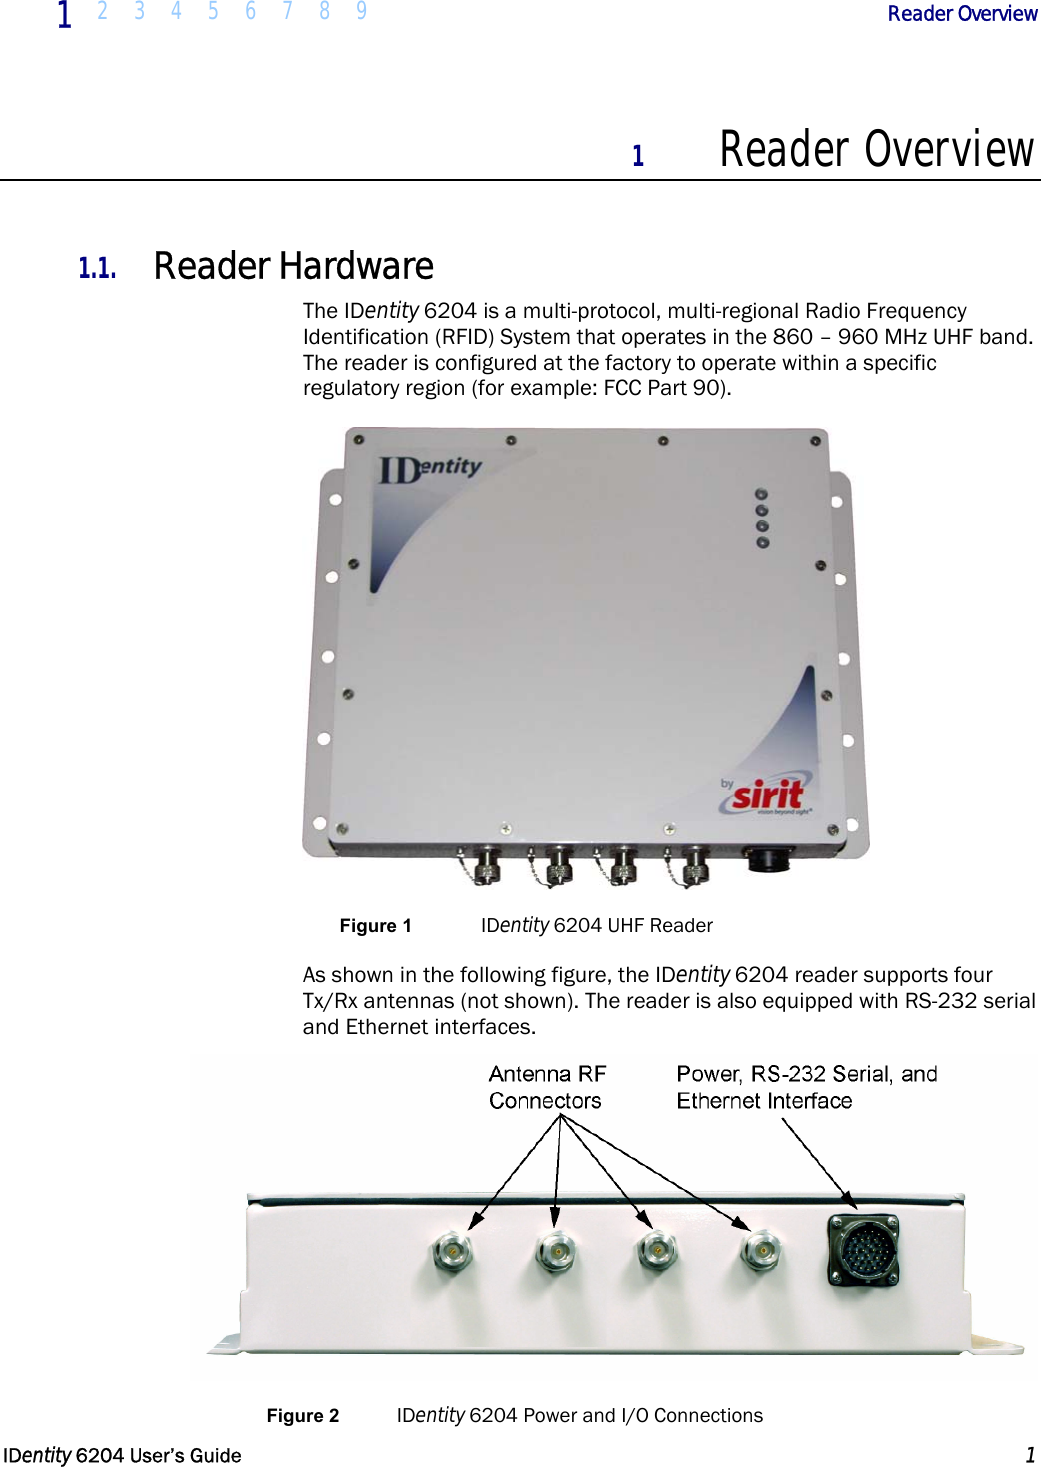  1  2 3 4 5 6 7 8 9             Reader Overview   IDentity 6204 User’s Guide  1  1 Reader Overview  1.1. Reader Hardware The IDentity 6204 is a multi-protocol, multi-regional Radio Frequency Identification (RFID) System that operates in the 860 – 960 MHz UHF band. The reader is configured at the factory to operate within a specific regulatory region (for example: FCC Part 90).  Figure 1  IDentity 6204 UHF Reader As shown in the following figure, the IDentity 6204 reader supports four Tx/Rx antennas (not shown). The reader is also equipped with RS-232 serial and Ethernet interfaces.  Figure 2  IDentity 6204 Power and I/O Connections 